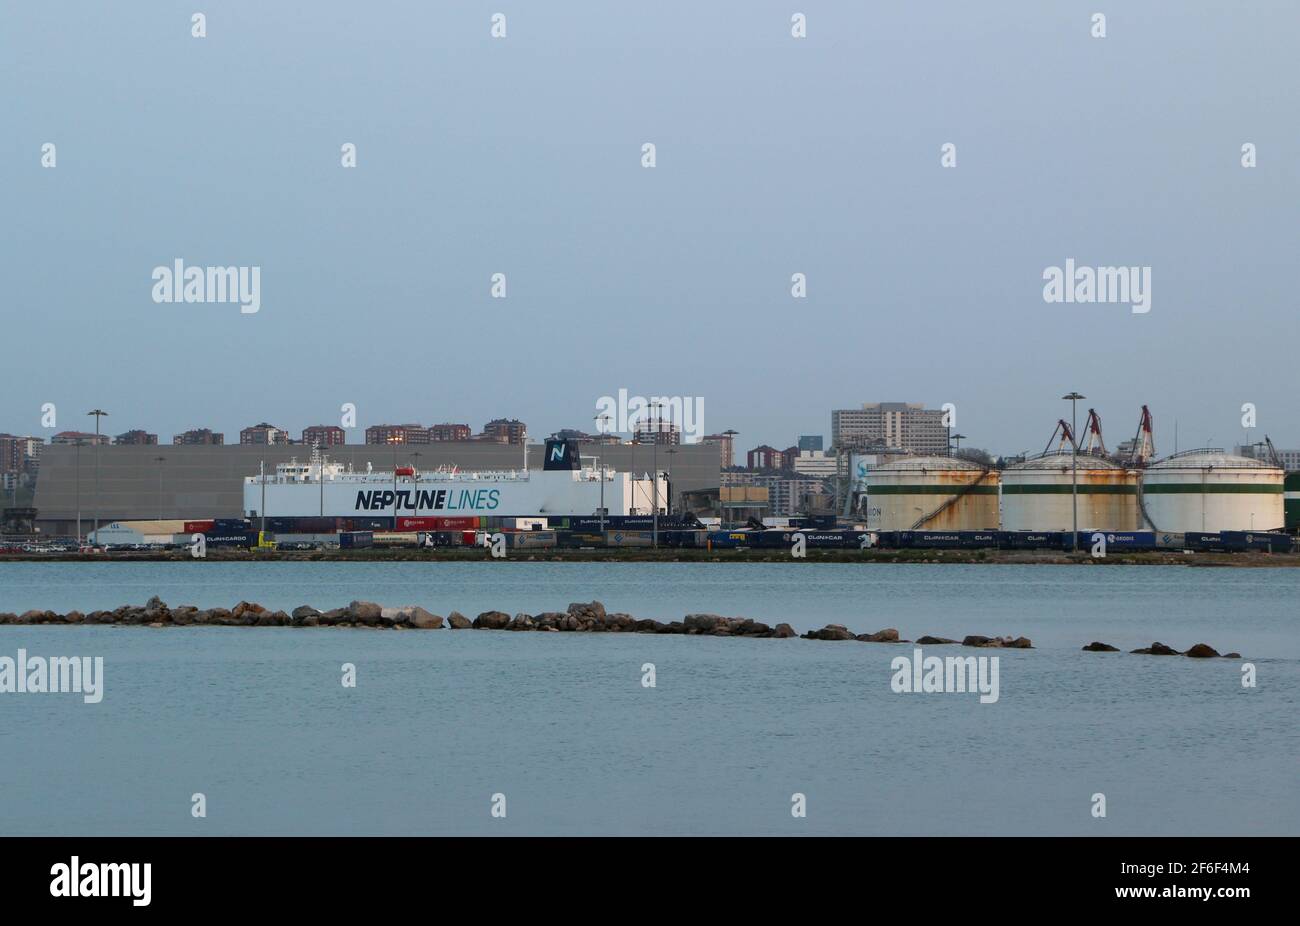 View across the bay of Santander Cantabria Spain with the port and the roro vehicles carrier cargo ship Neptune Dynamis in port and silos Stock Photo